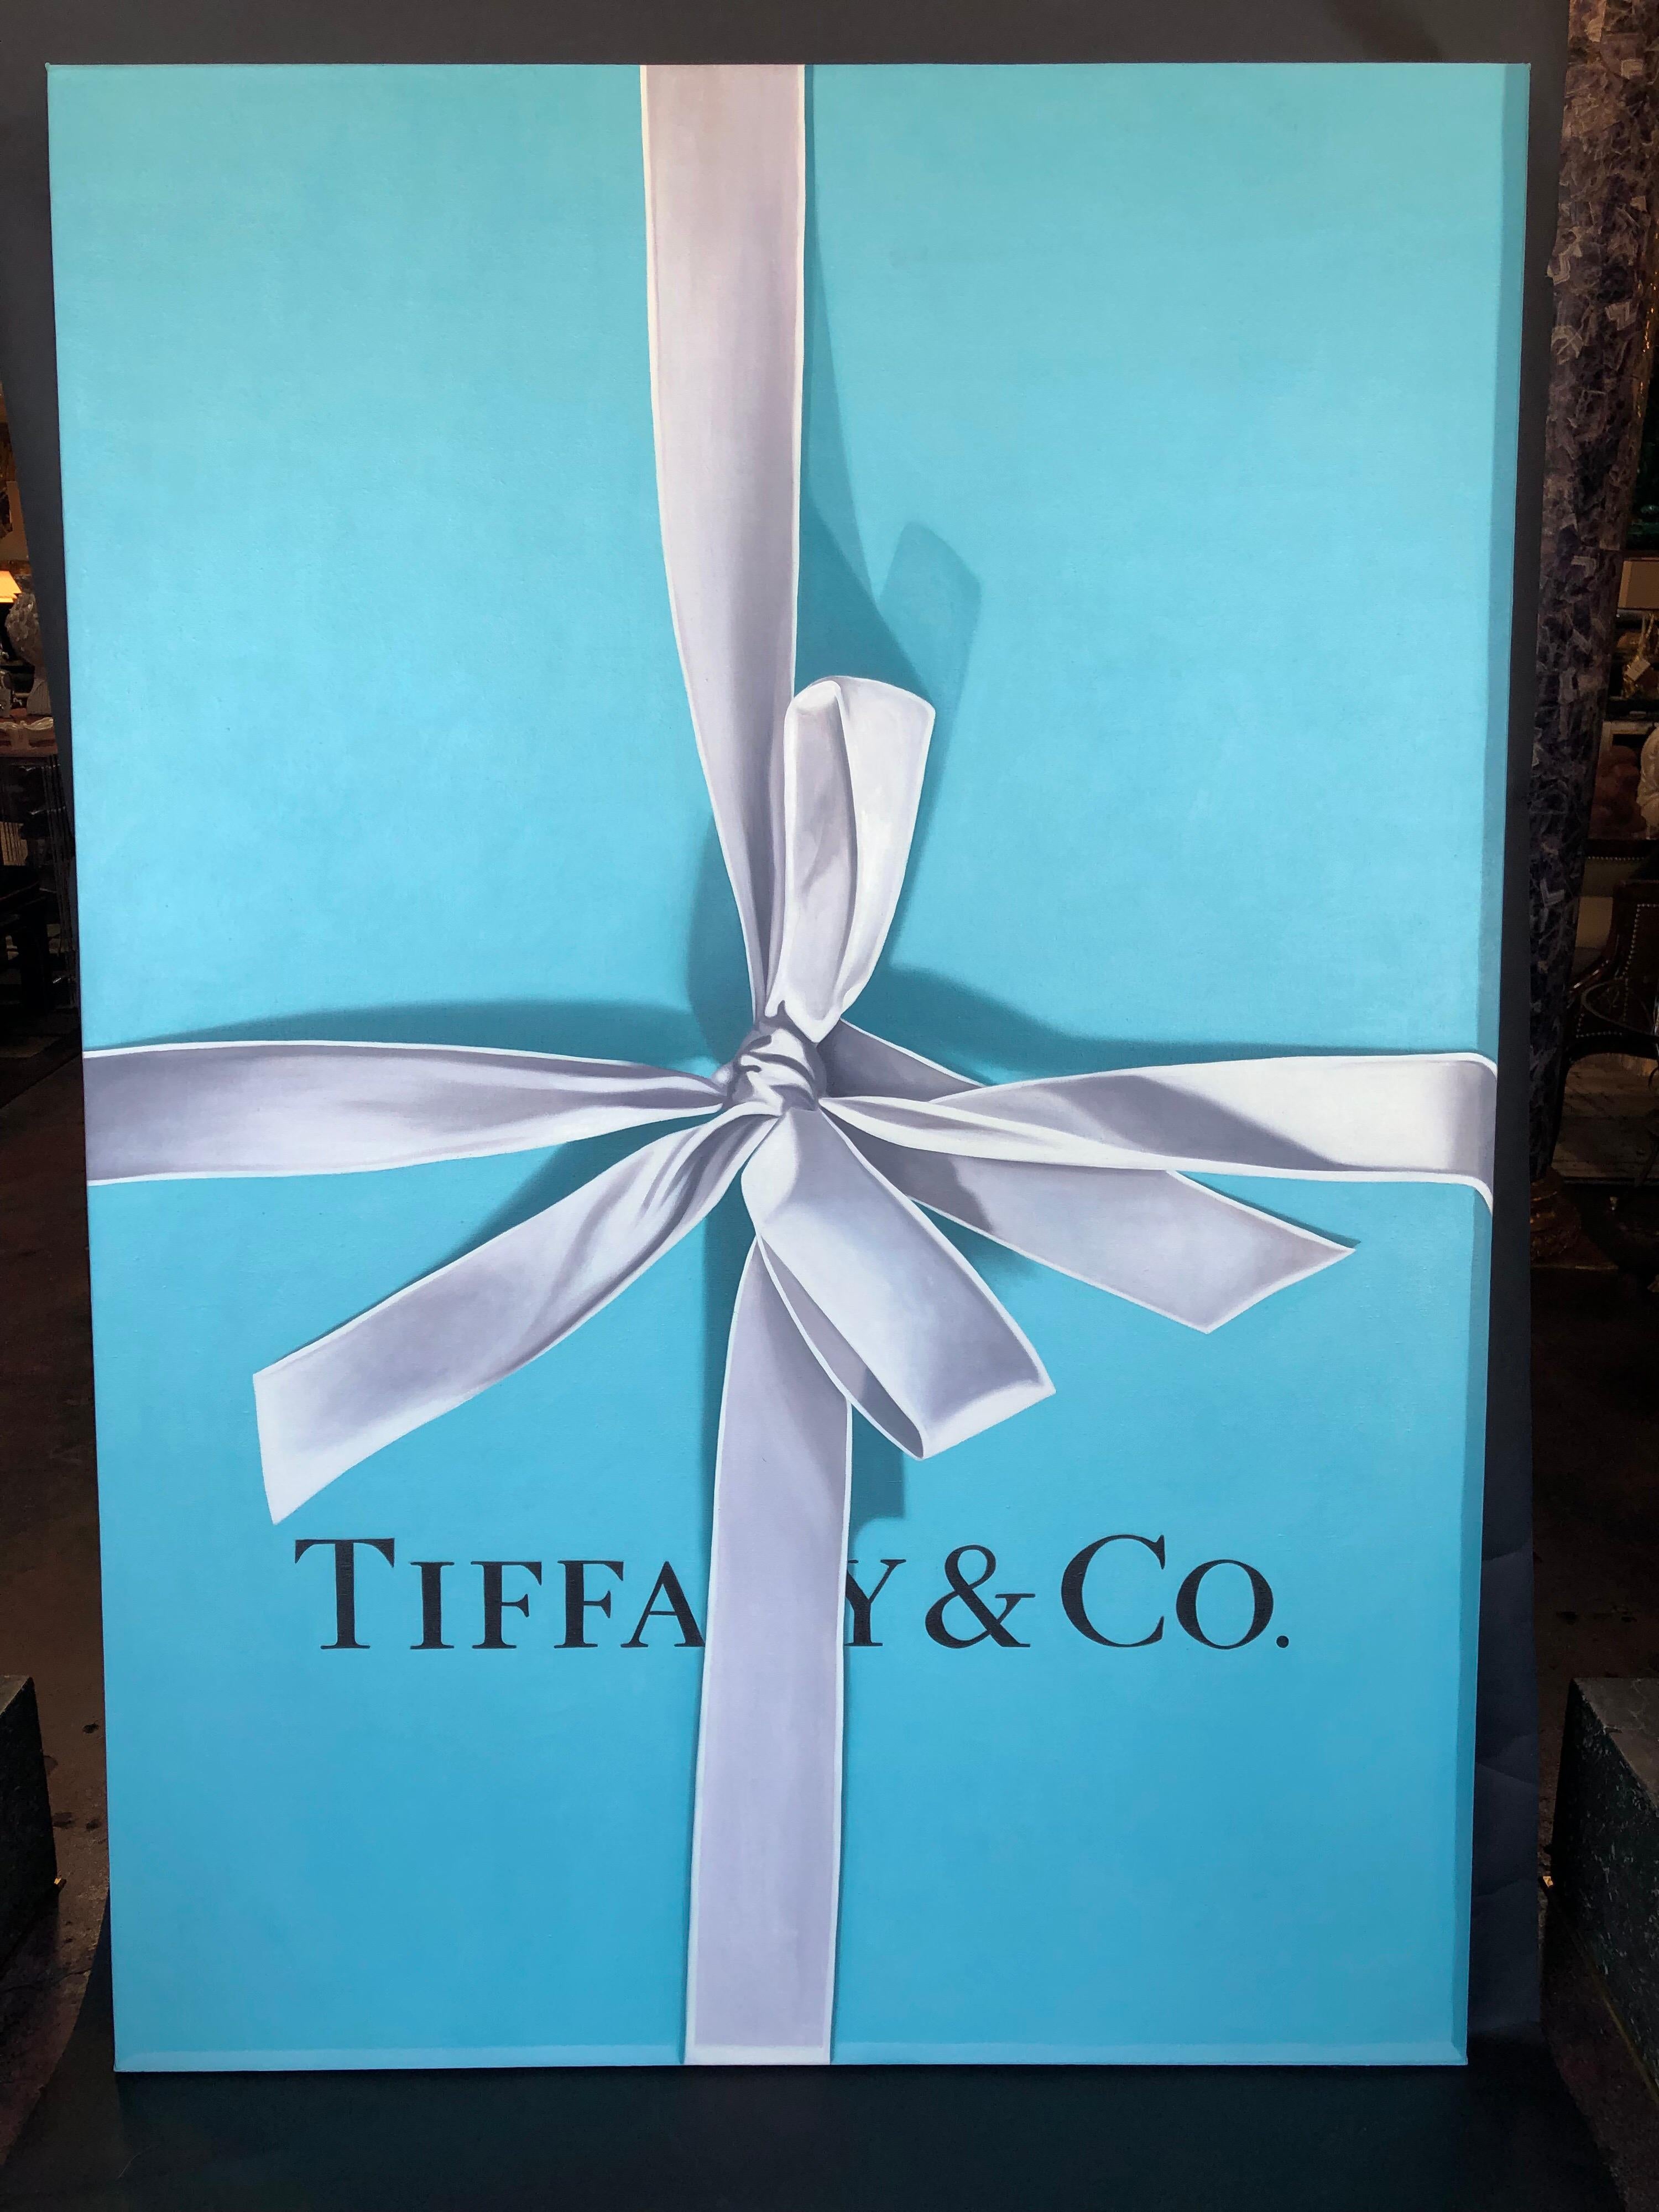 Tiffany gift box oil on canvas by Billy Monsalve Duffo. Signed on back.